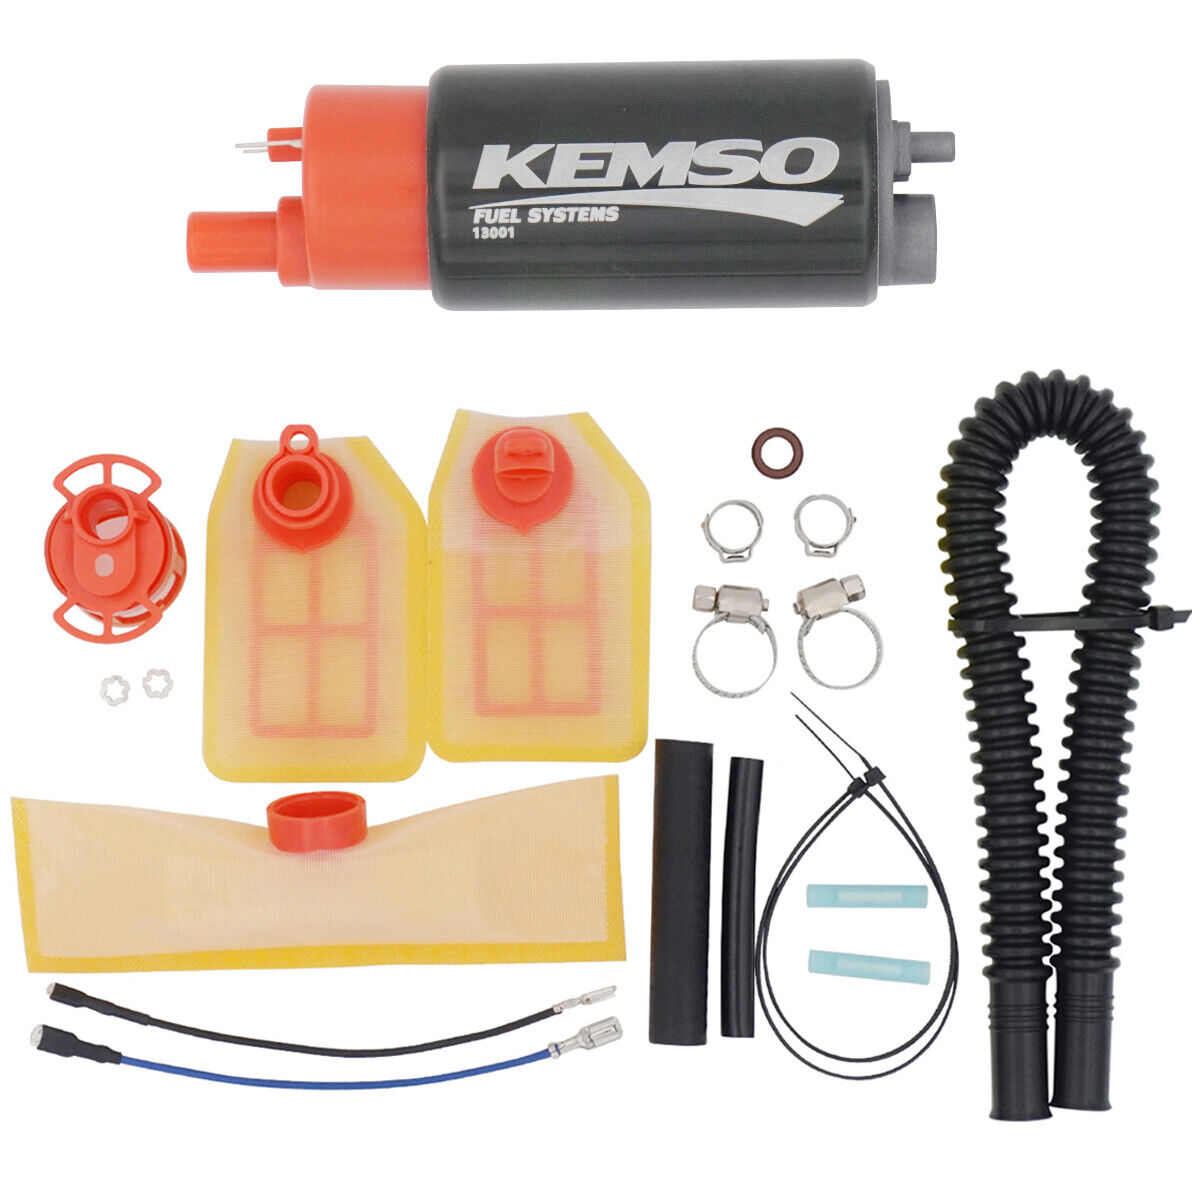 KEMSO 13001 Fuel Pump + Strainers, O-ring, Wiring, Flex/Rubber hoses, Clamps